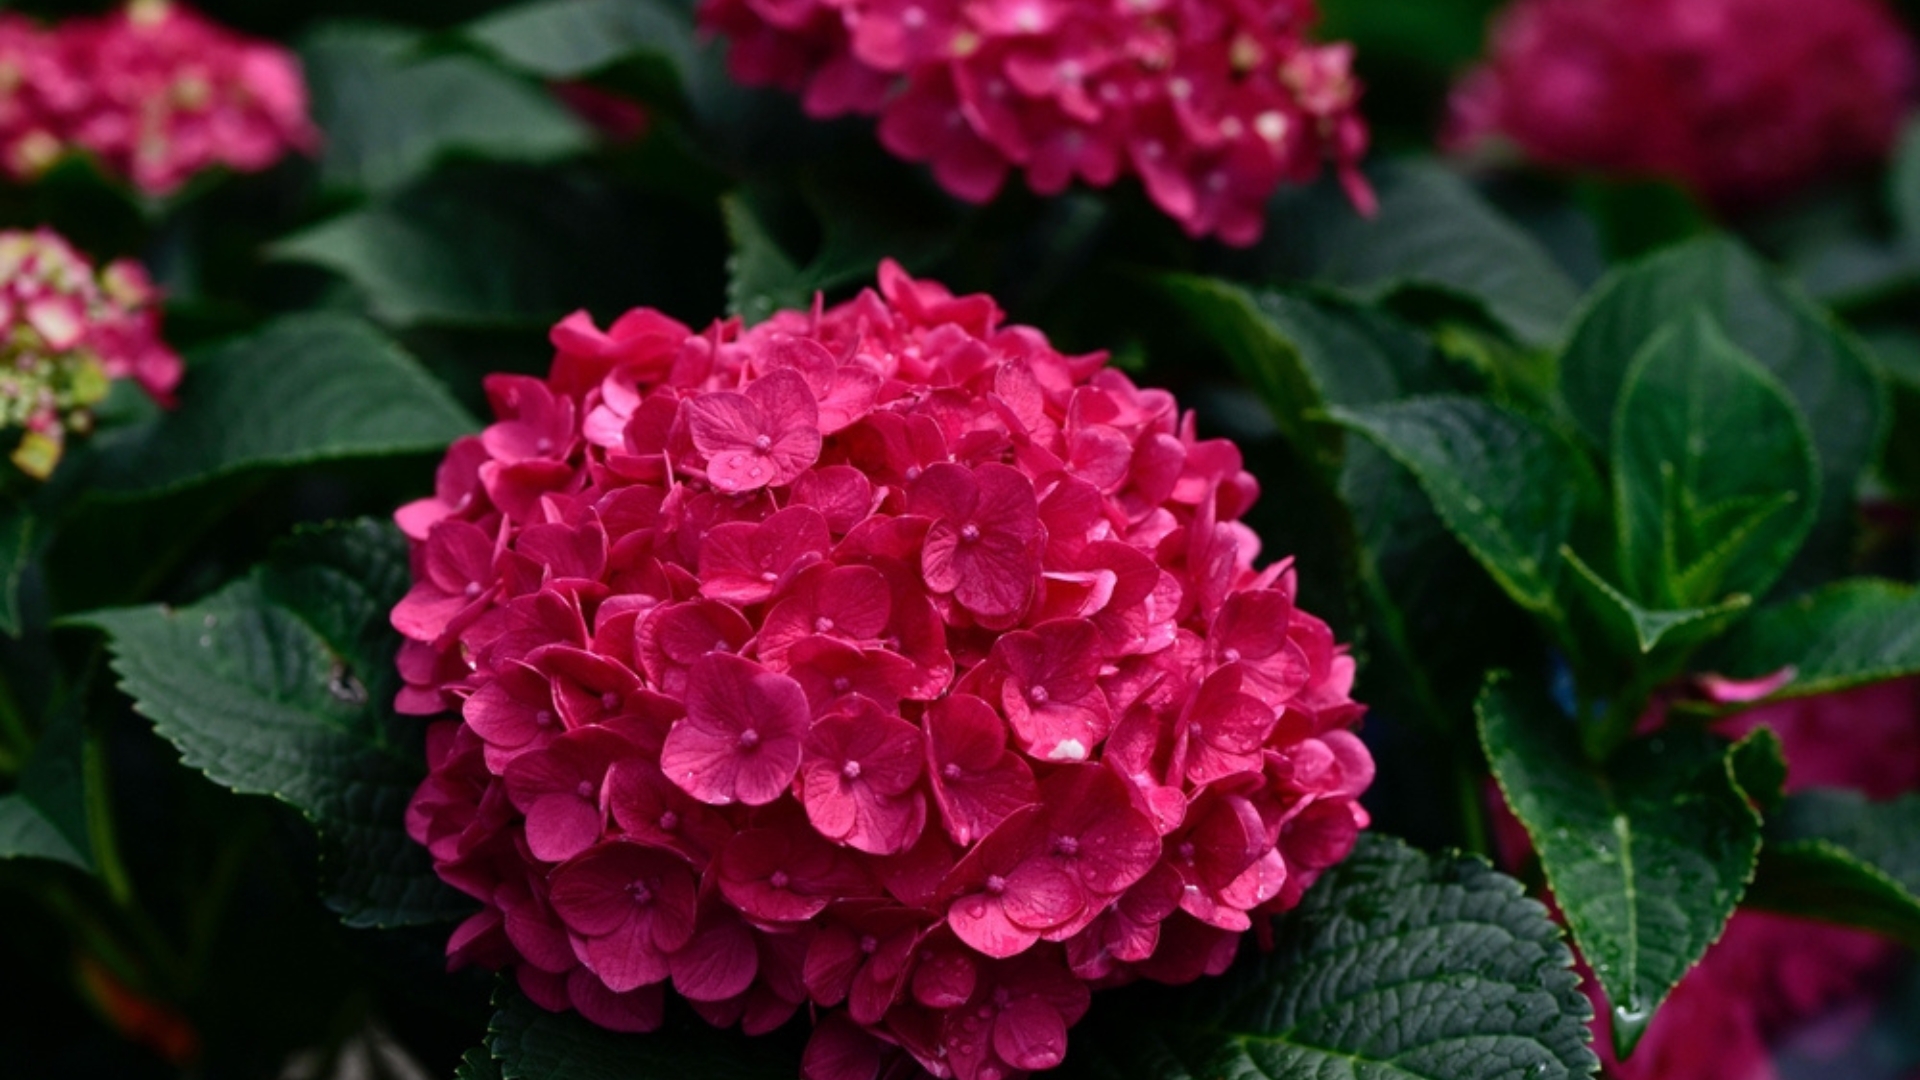 Summer Crush Hydrangea Is Exactly What Your Small Garden Needs To Stand Out This Season